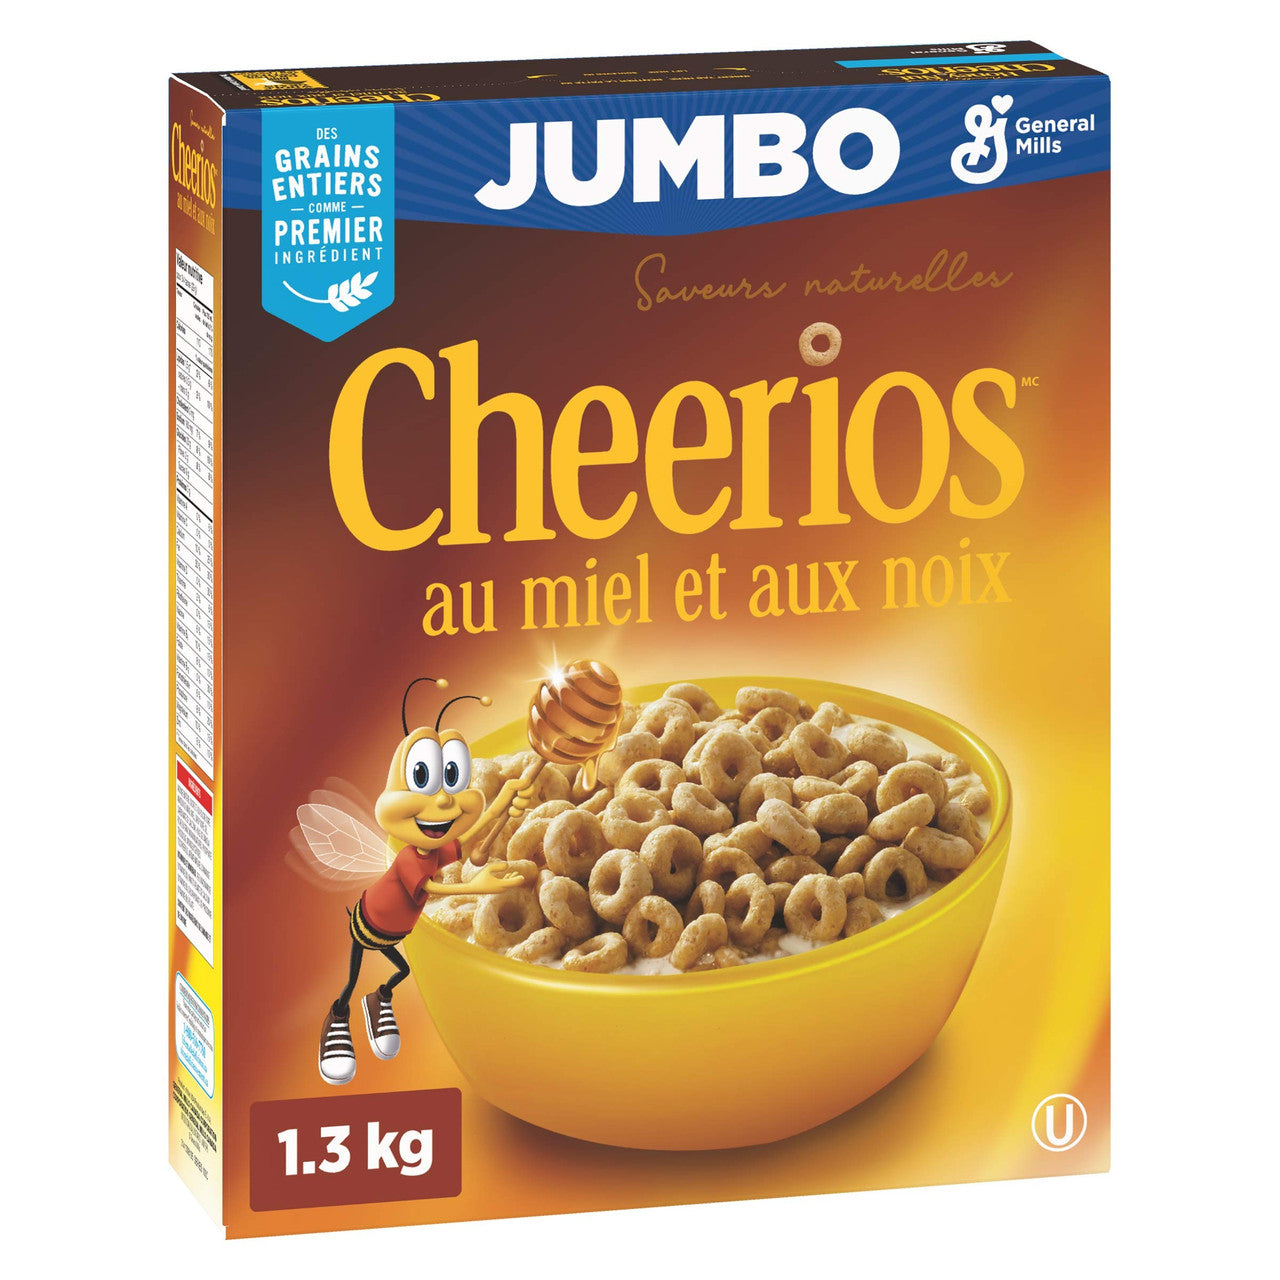 Cheerios Honey Nut Jumbo Cereal, 1.3kg/45.85oz, (Imported from Canada)